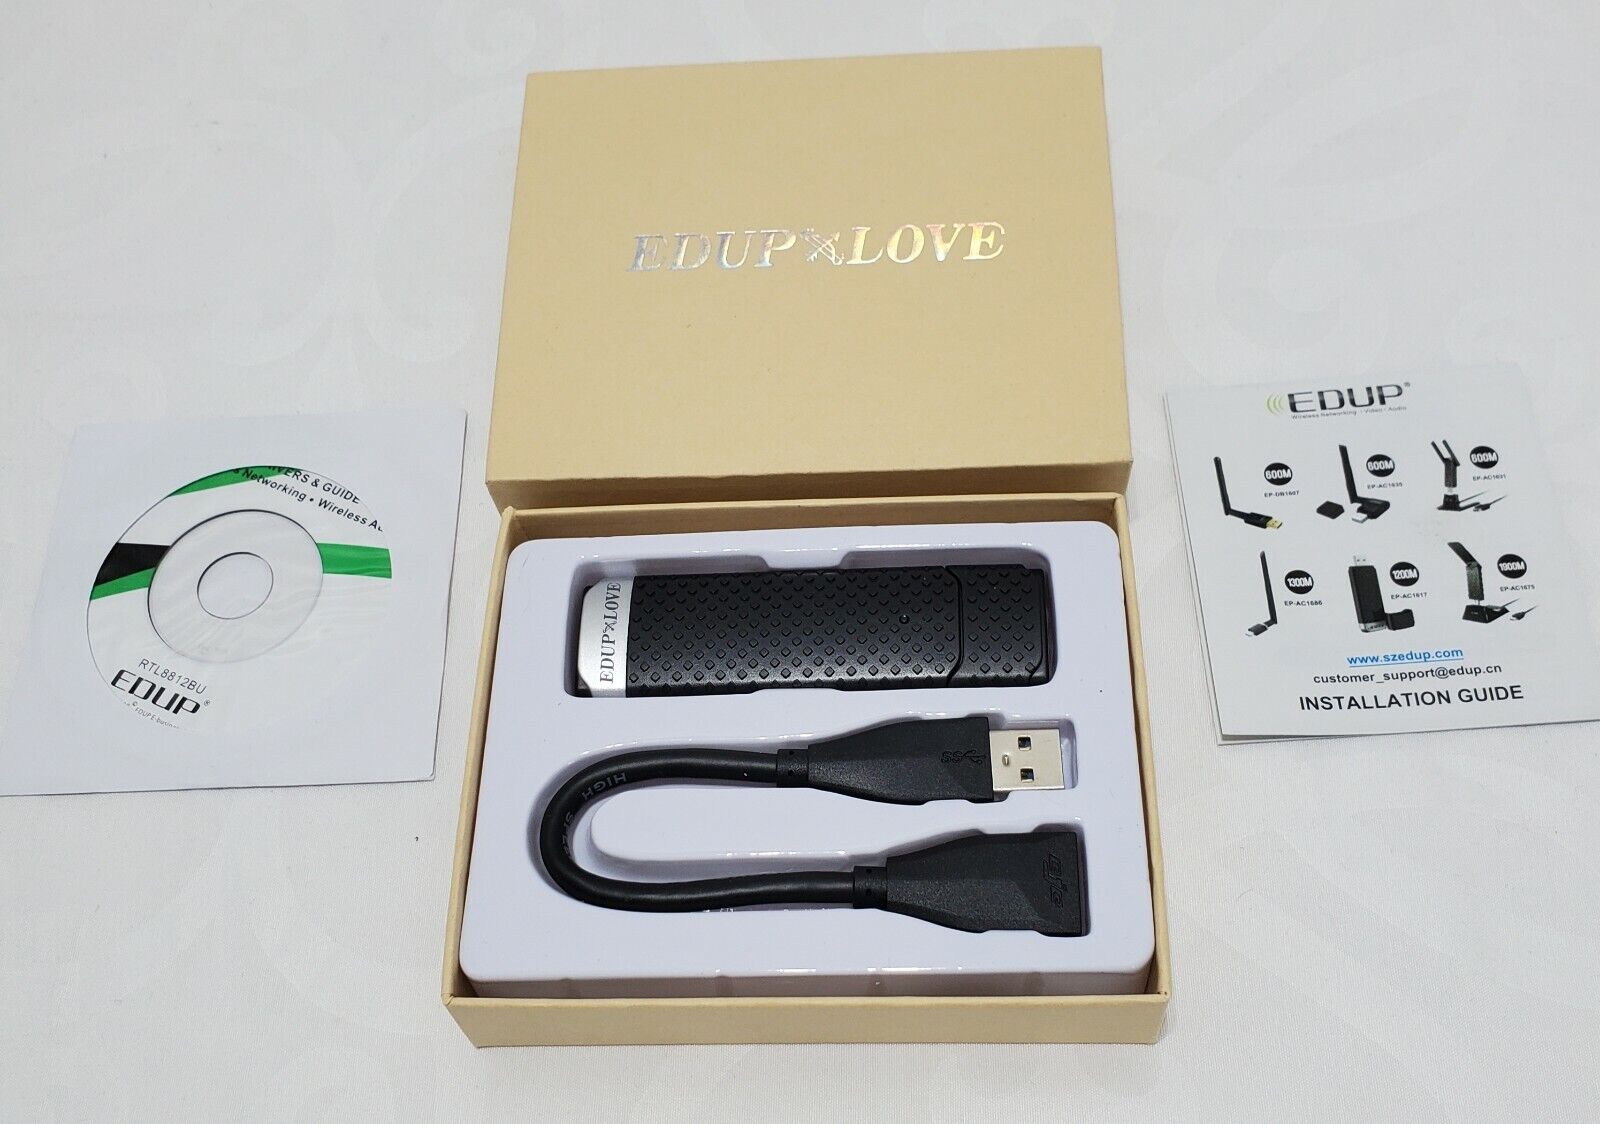 EDUP LOVE USB 3.0 WiFi Adapter AC1300Mbps for PC / Dual Band 5GHz 2.4GHz